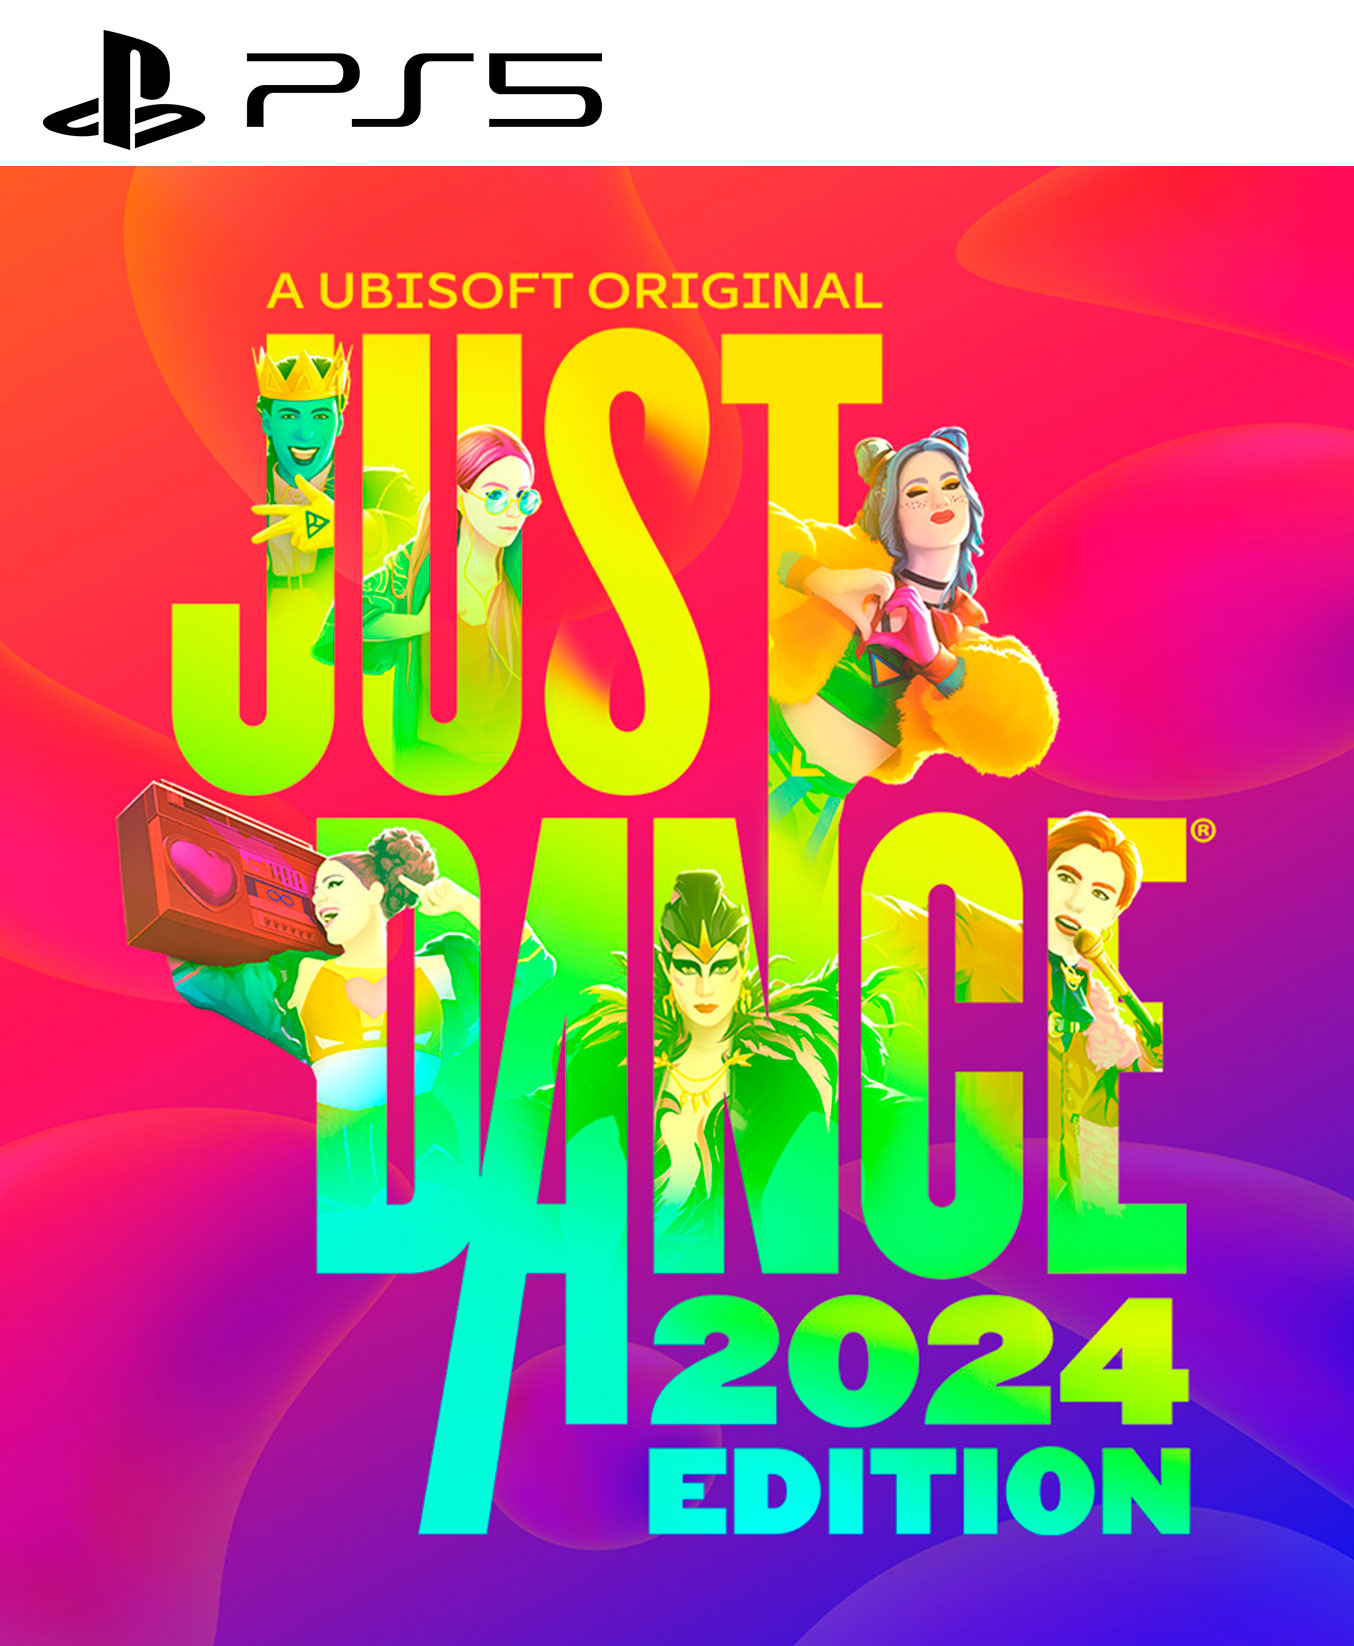 Just Dance 2024 Deluxe Edition on PS5 — price history, screenshots